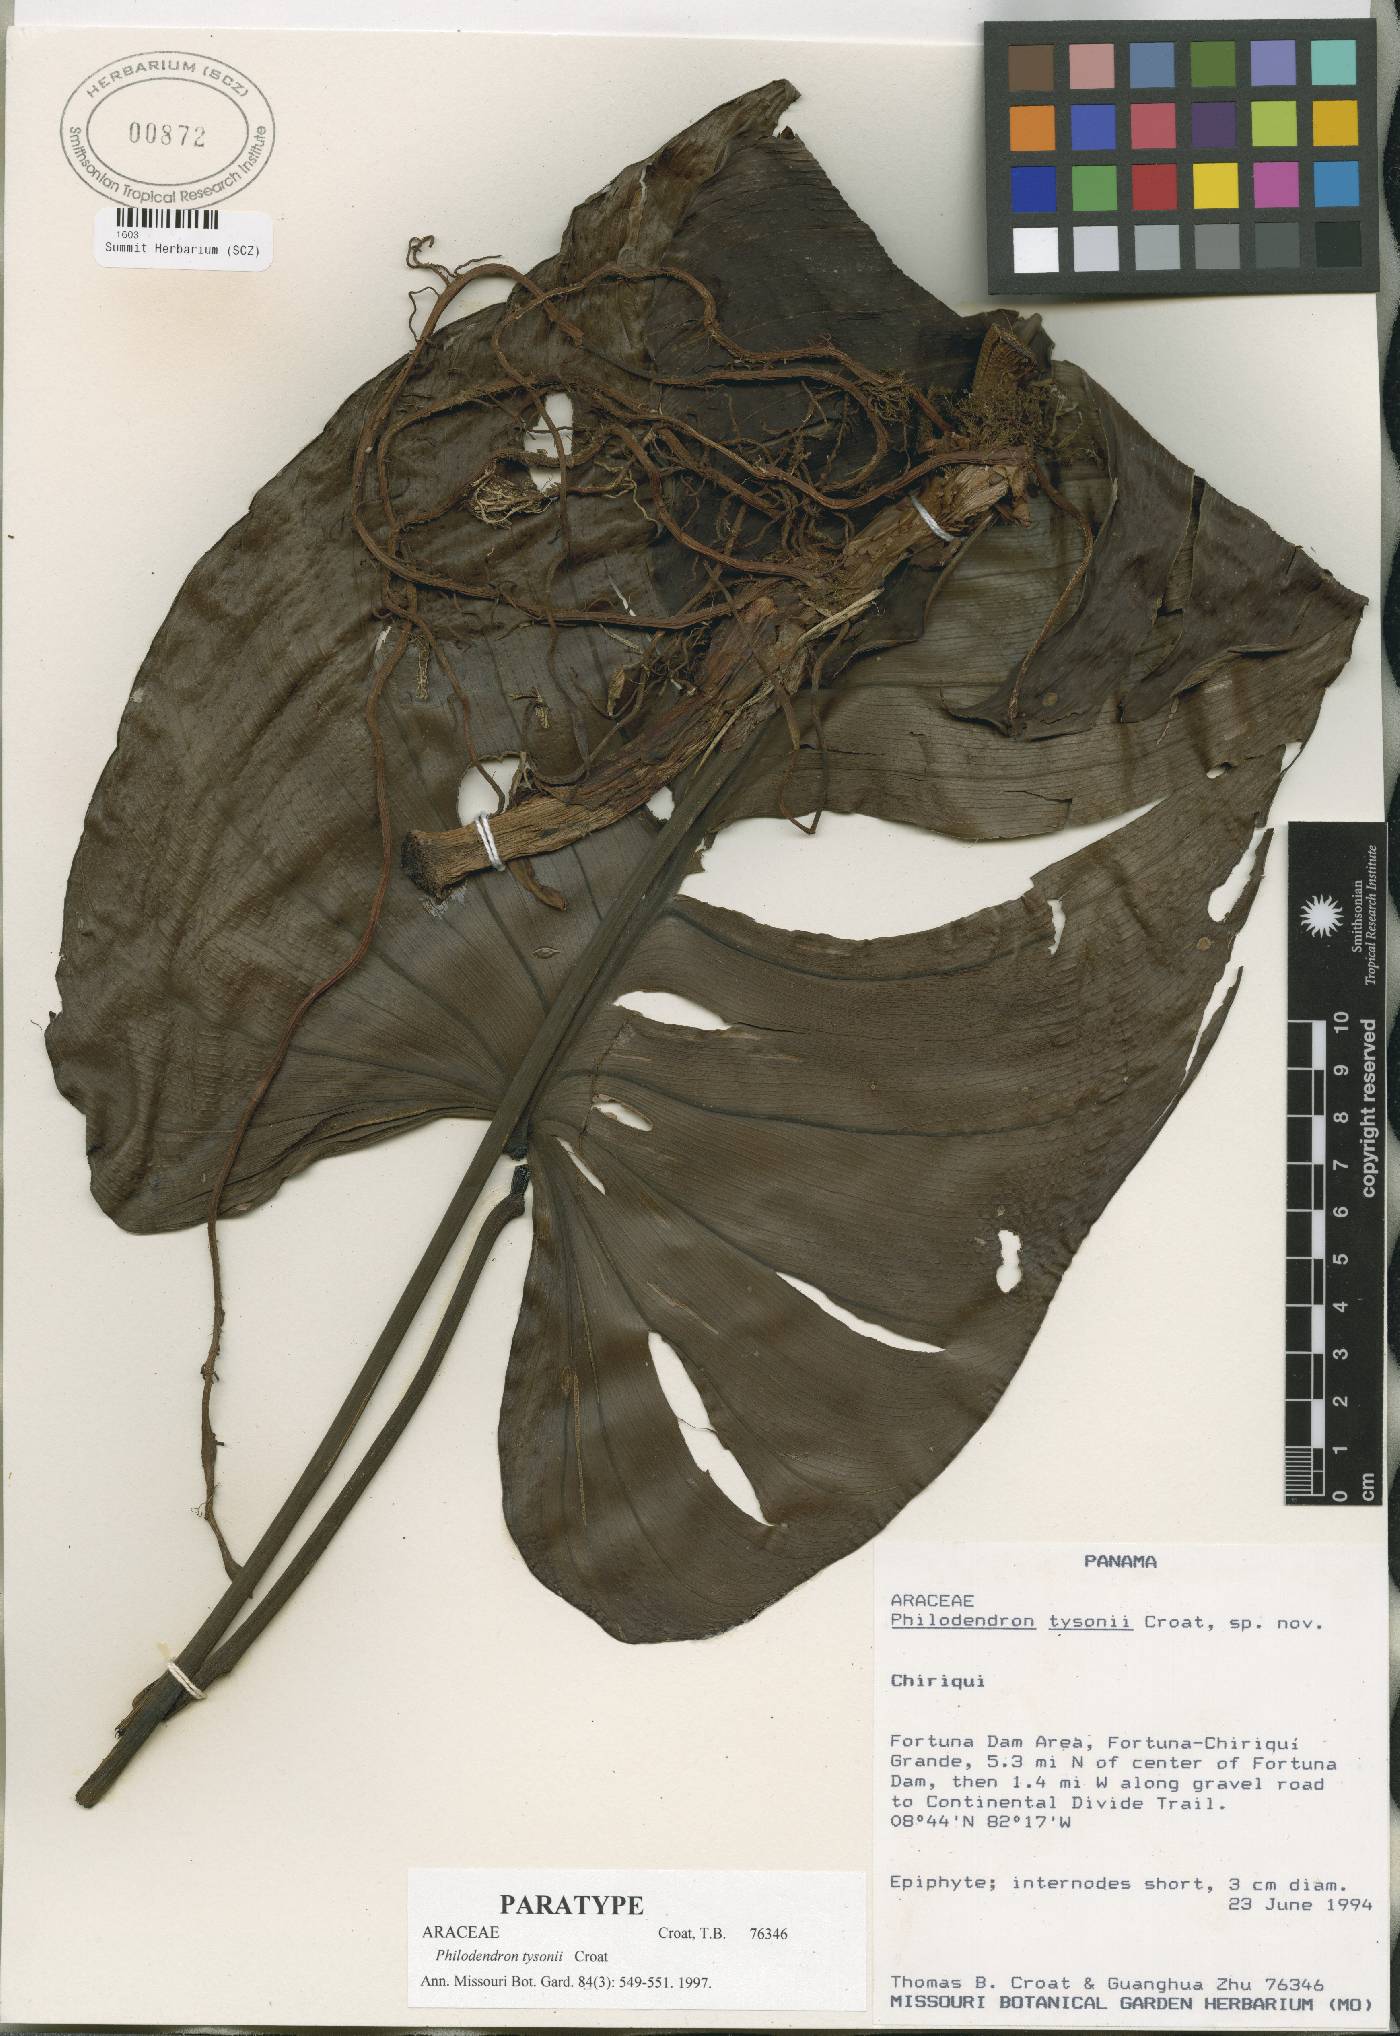 Philodendron tysonii image